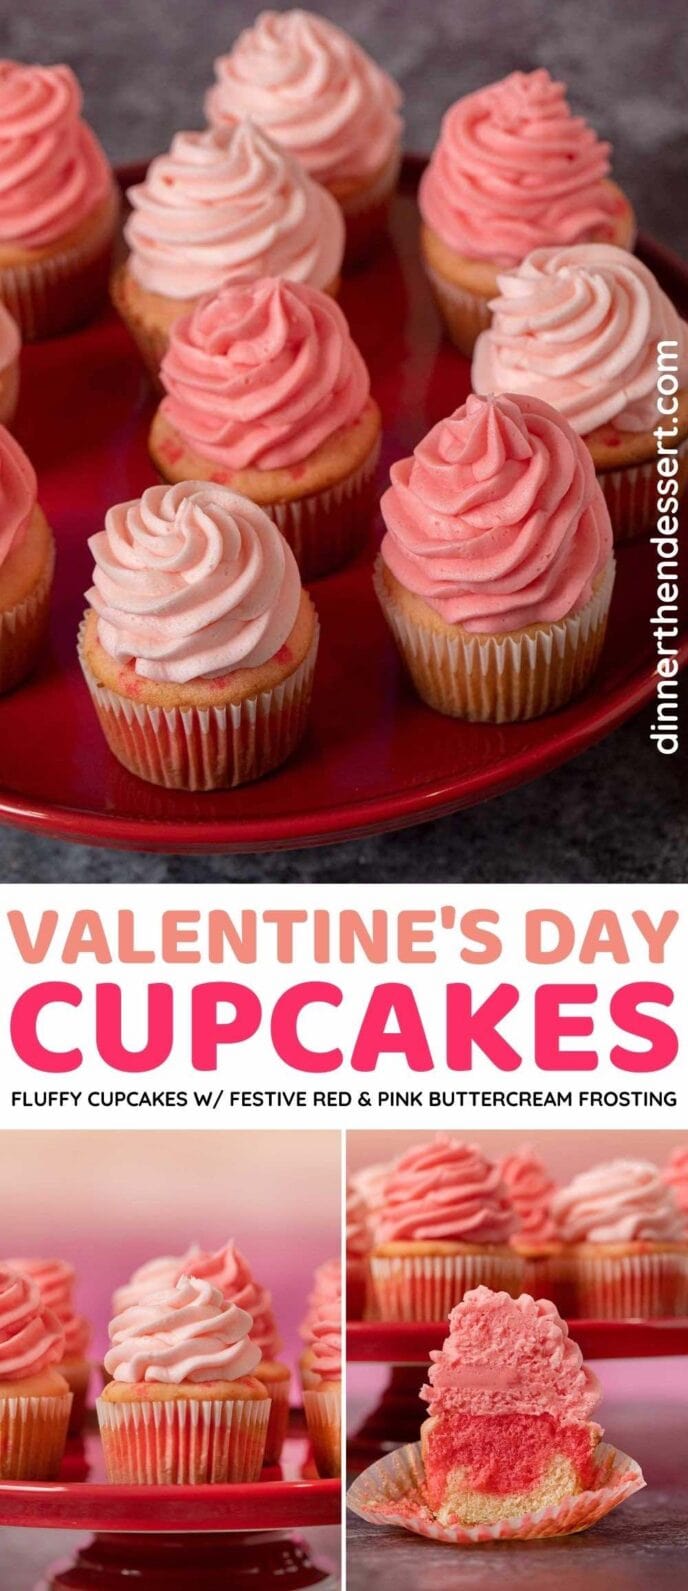 Valentine's Day Cupcakes collage